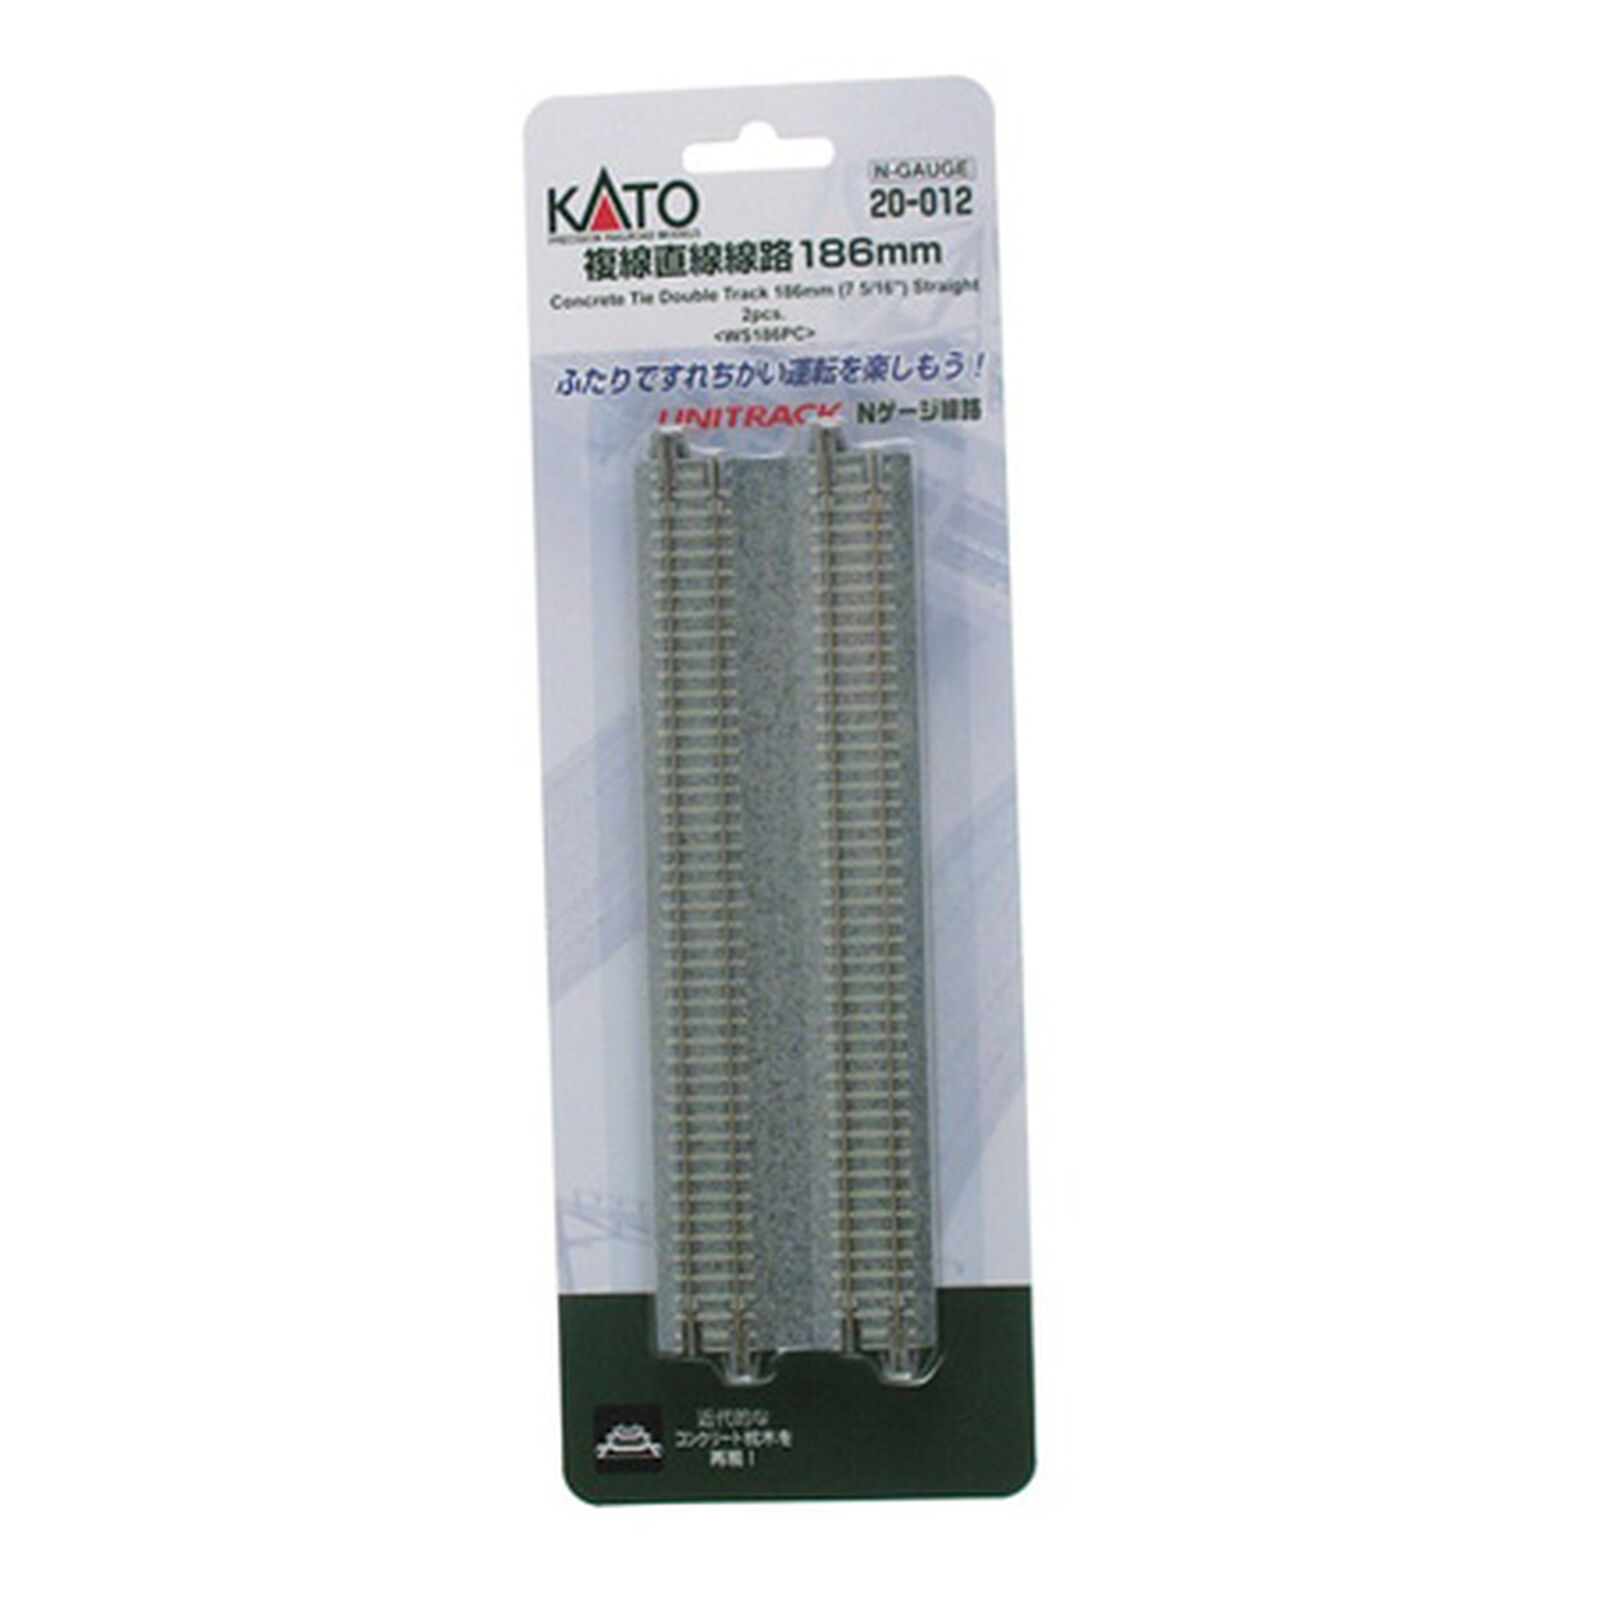 N 7-5/16" Double Track Straight, Concrete Ties (2)